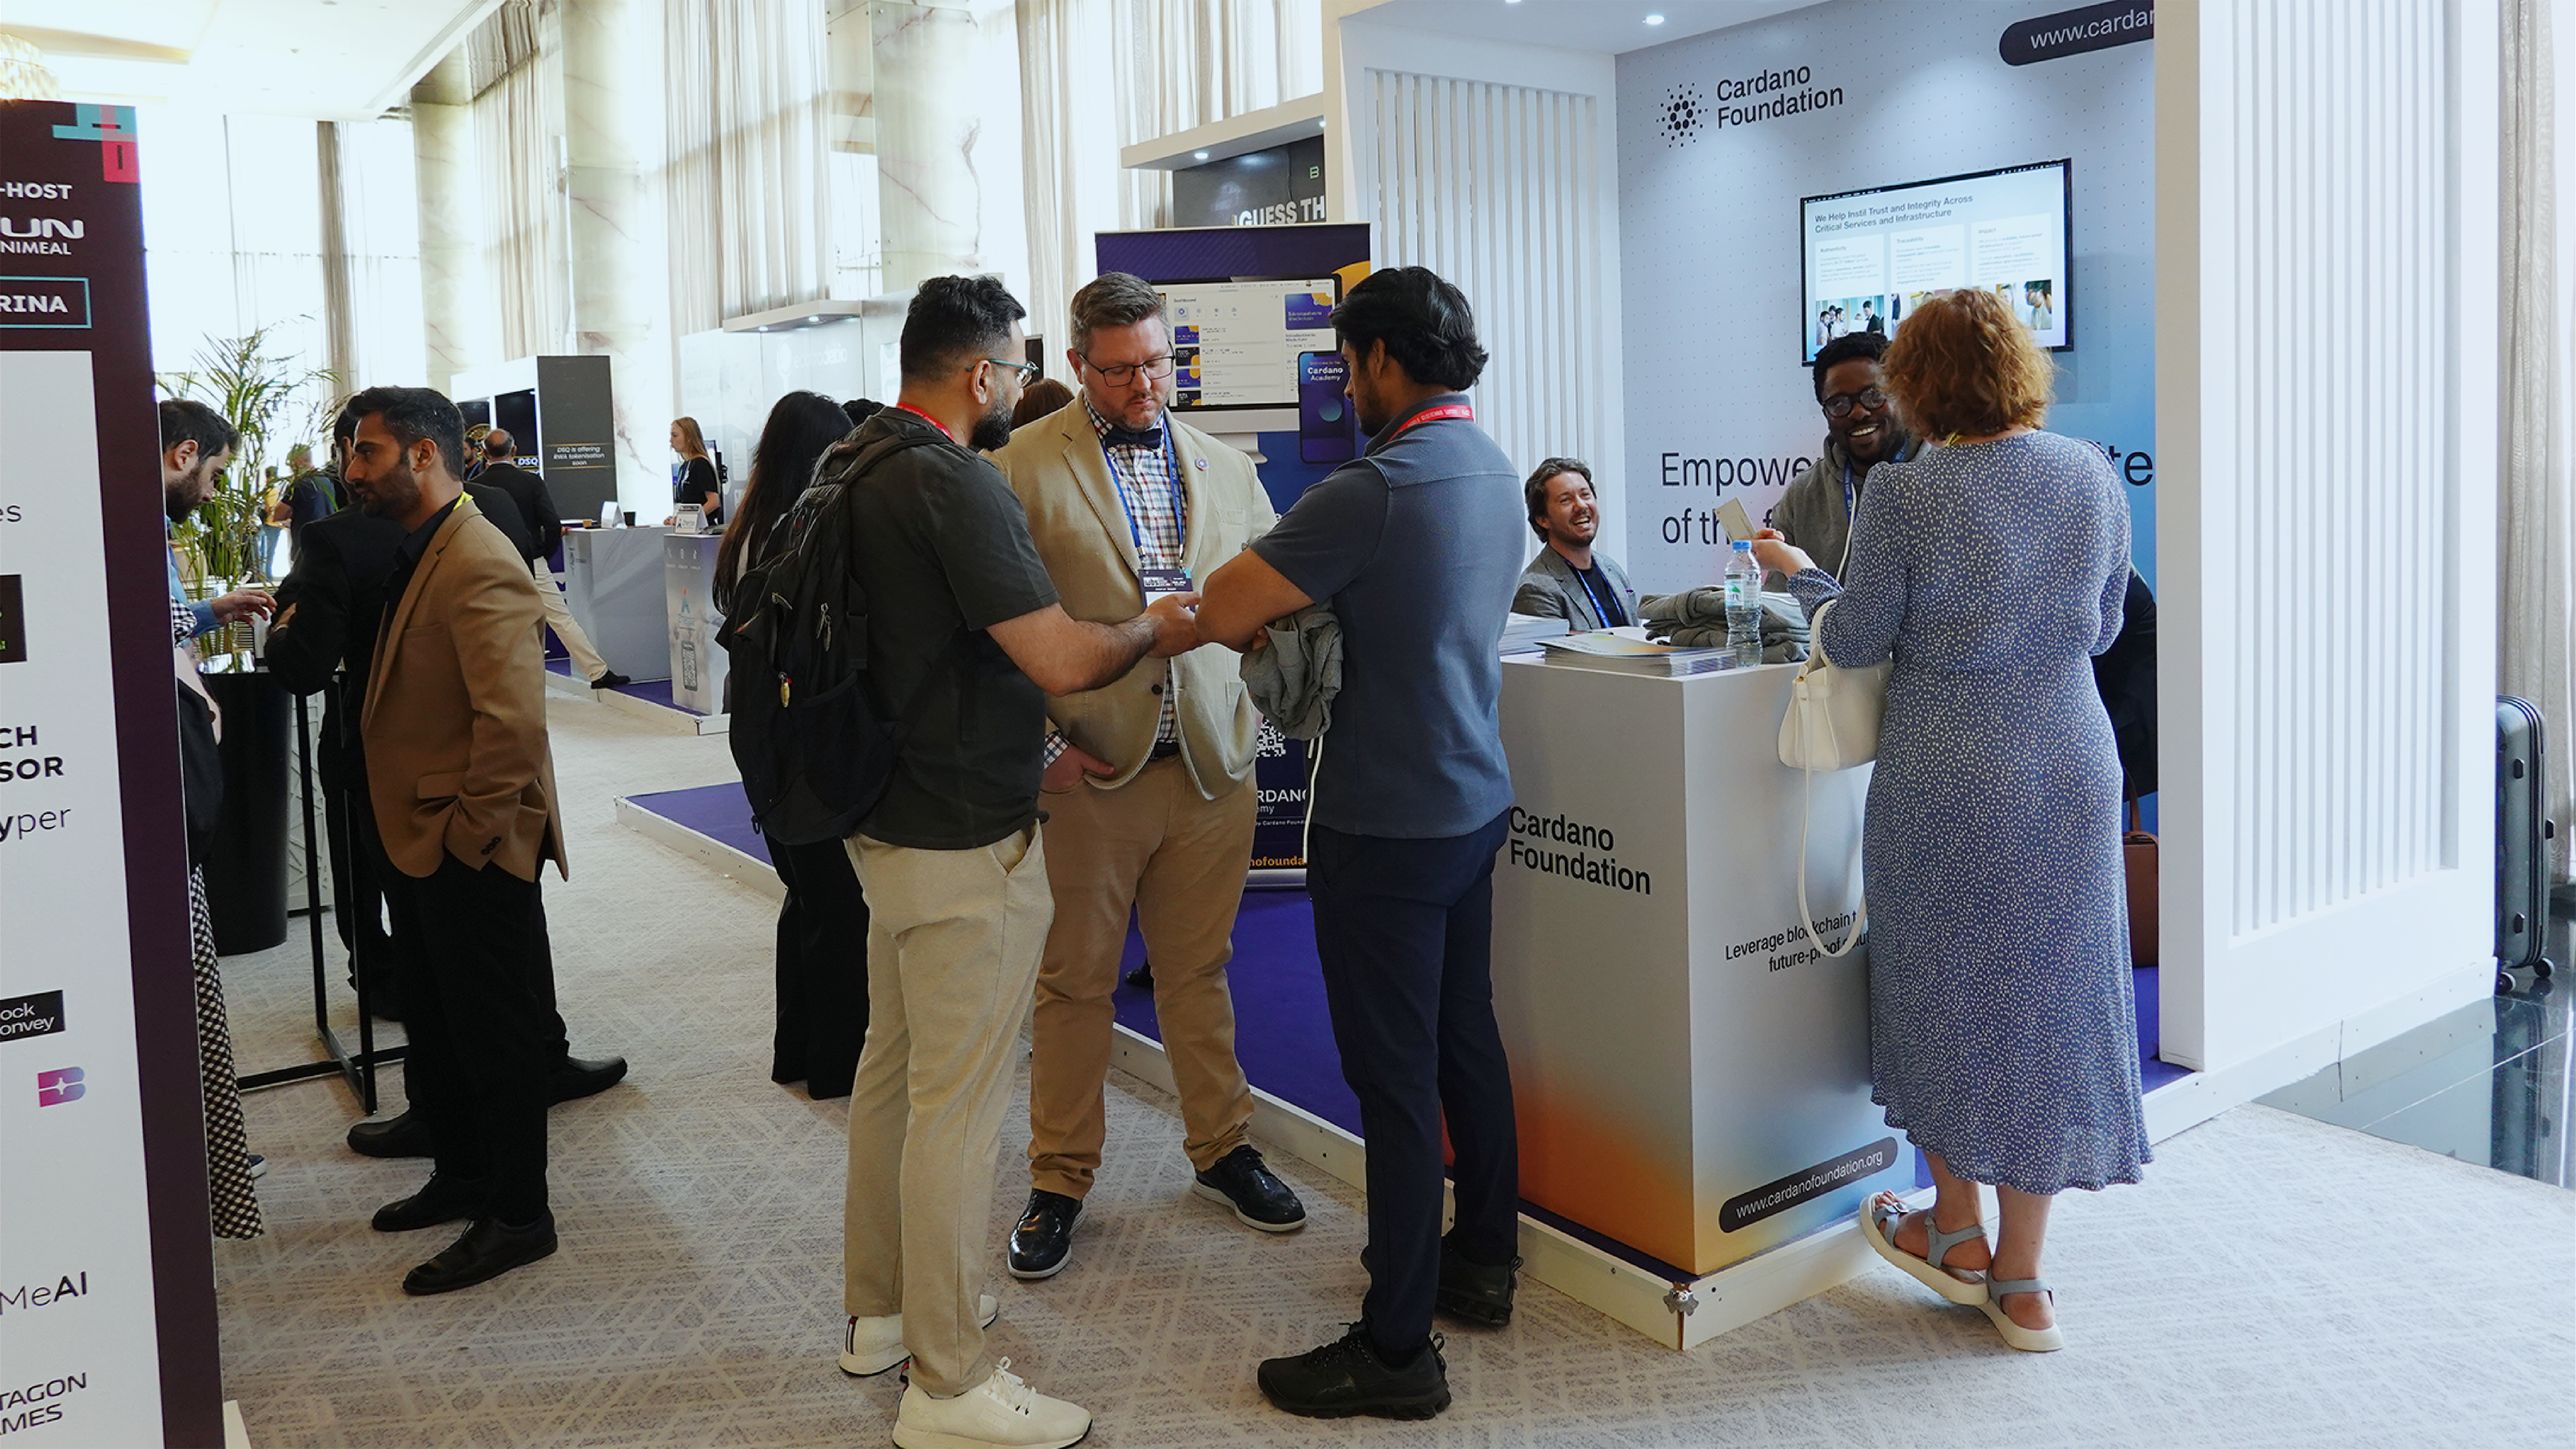 People interacting at the Cardano Foundation booth.